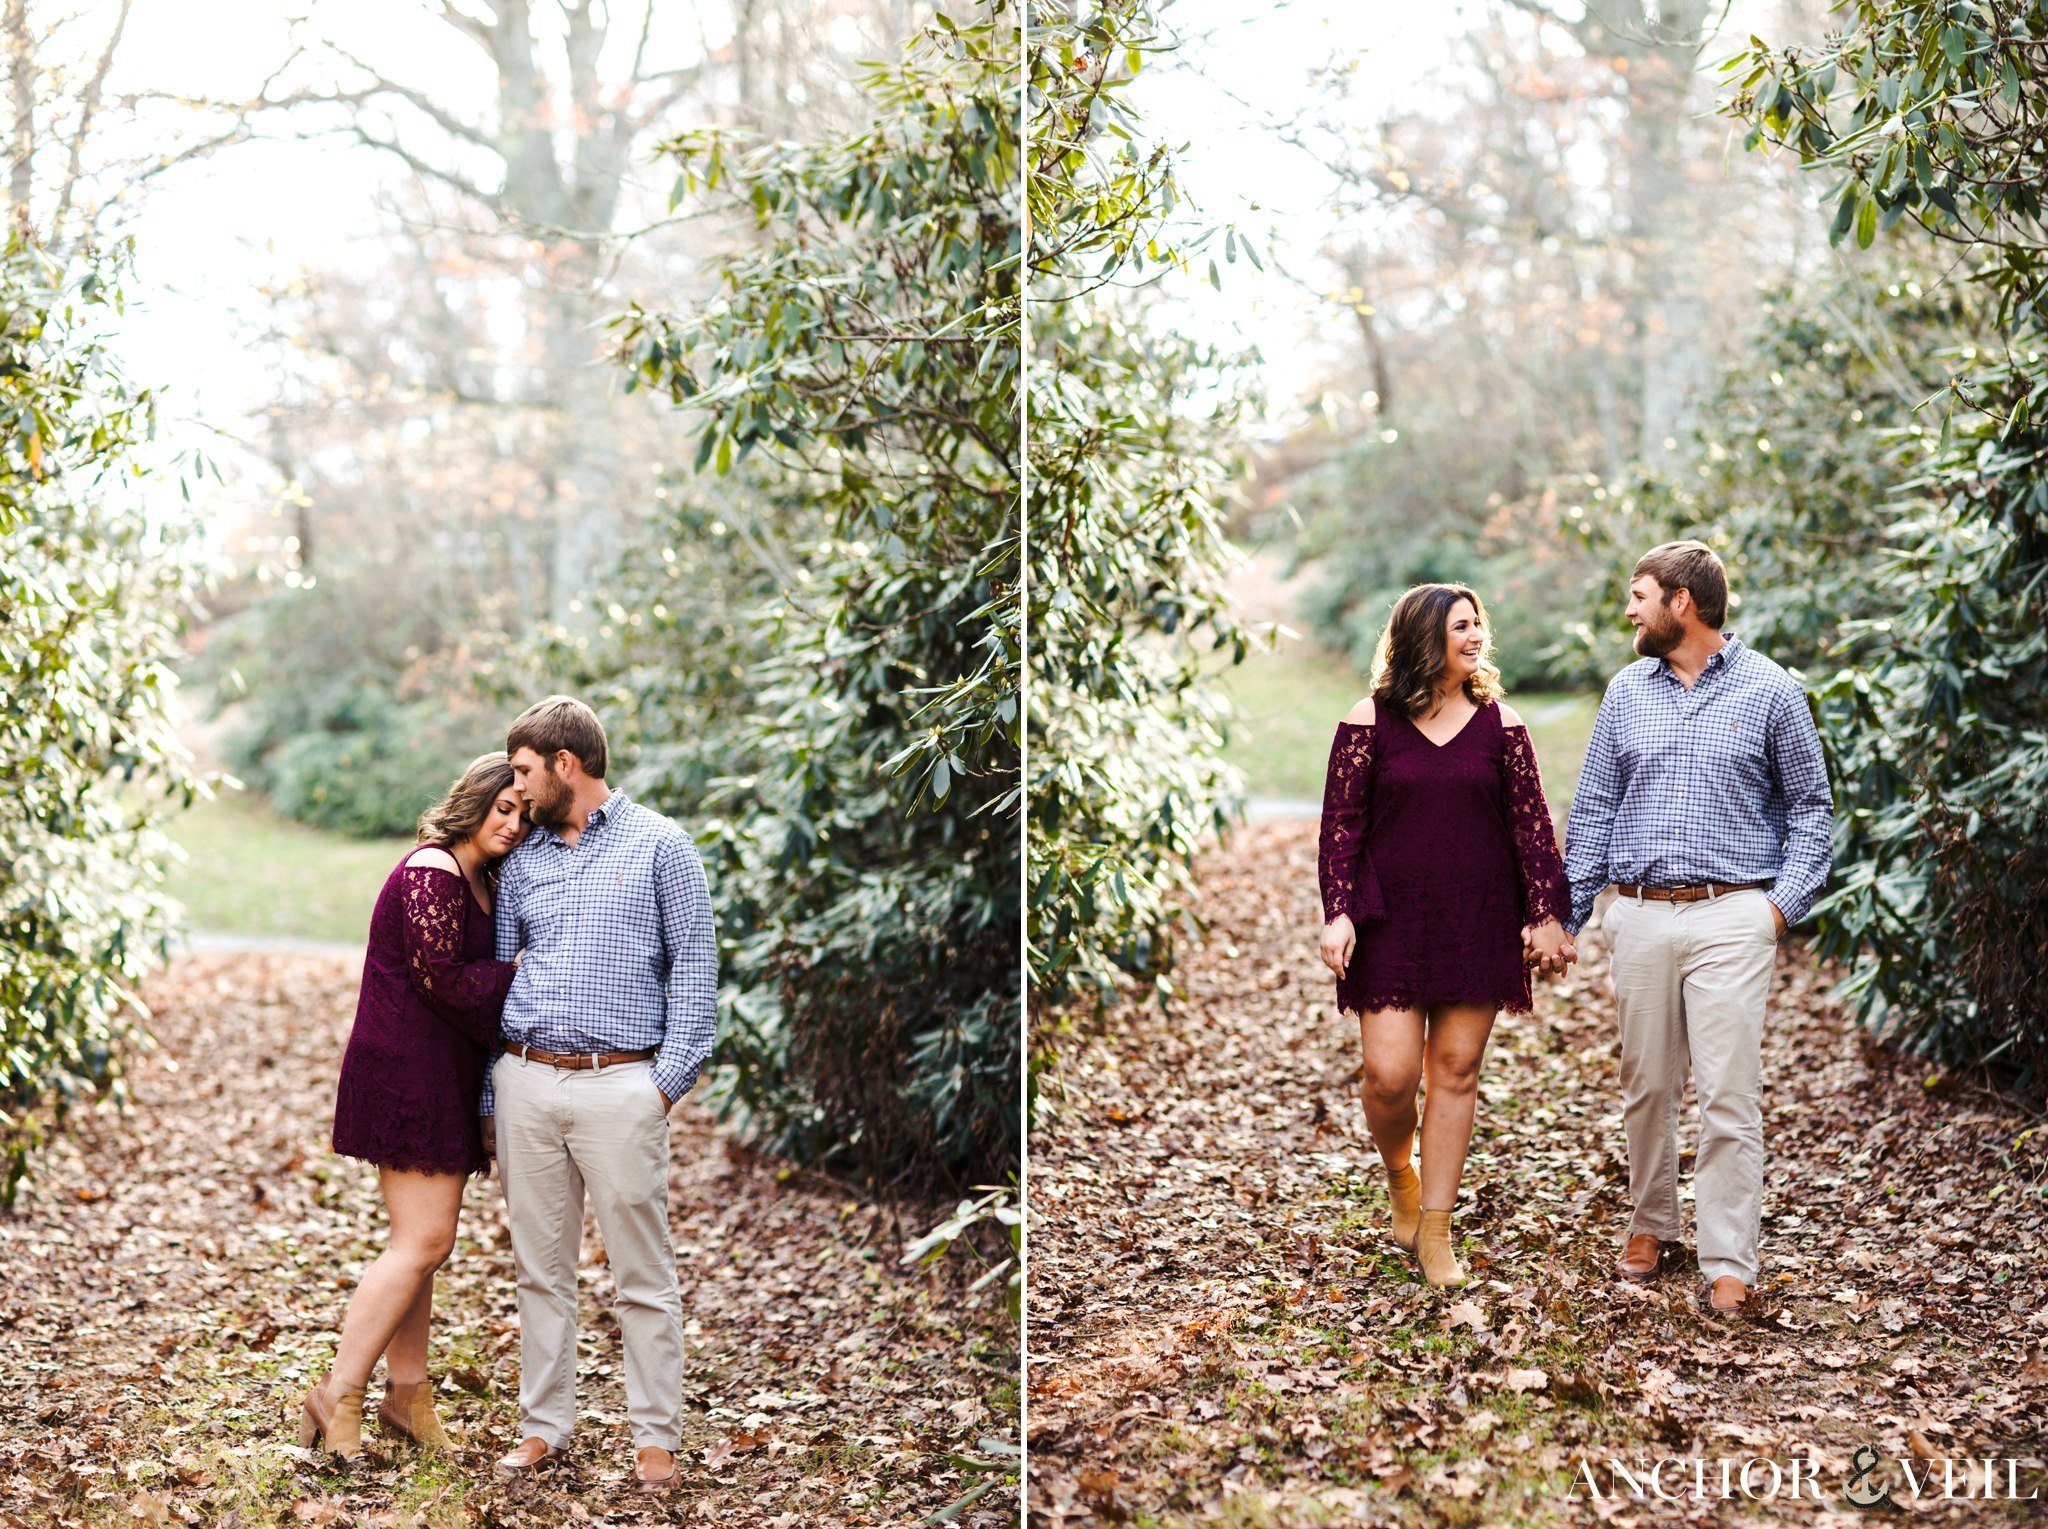 walking through the park together during the engagement session